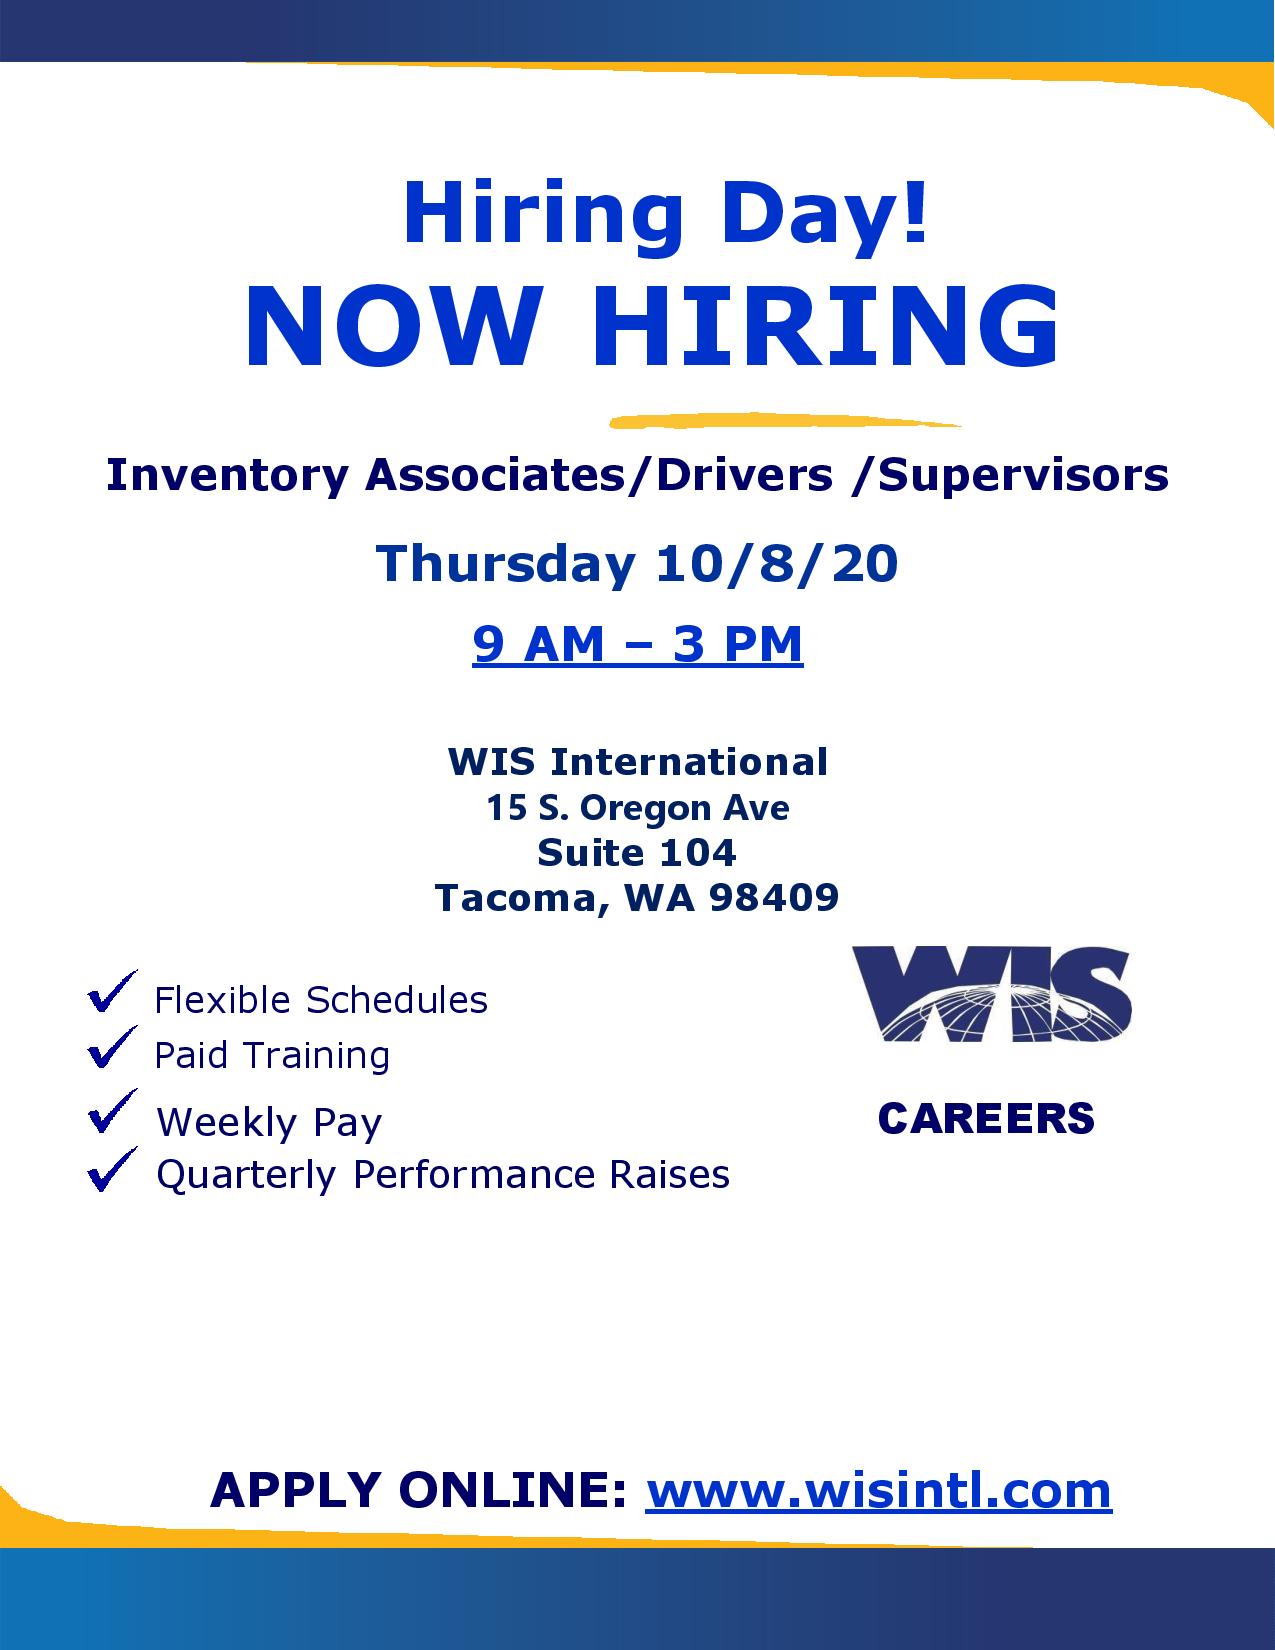 EMPLOYER EXTRA: Inventory Associates/Drivers and Supervisors 2